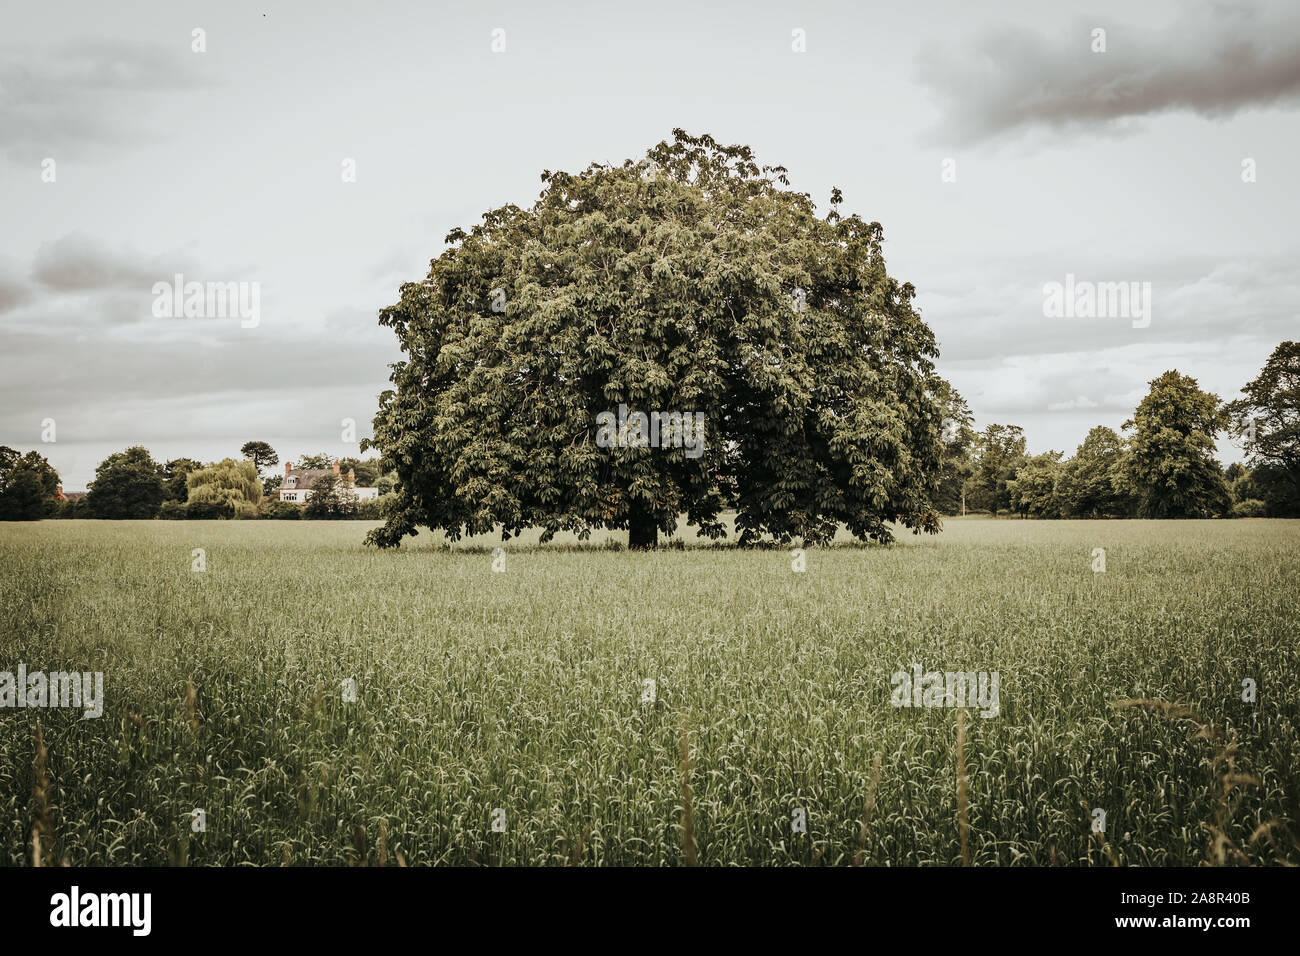 Tree in the middle of a field -Deer grazing @ Dunham Massey,  United Kingdom Stock Photo